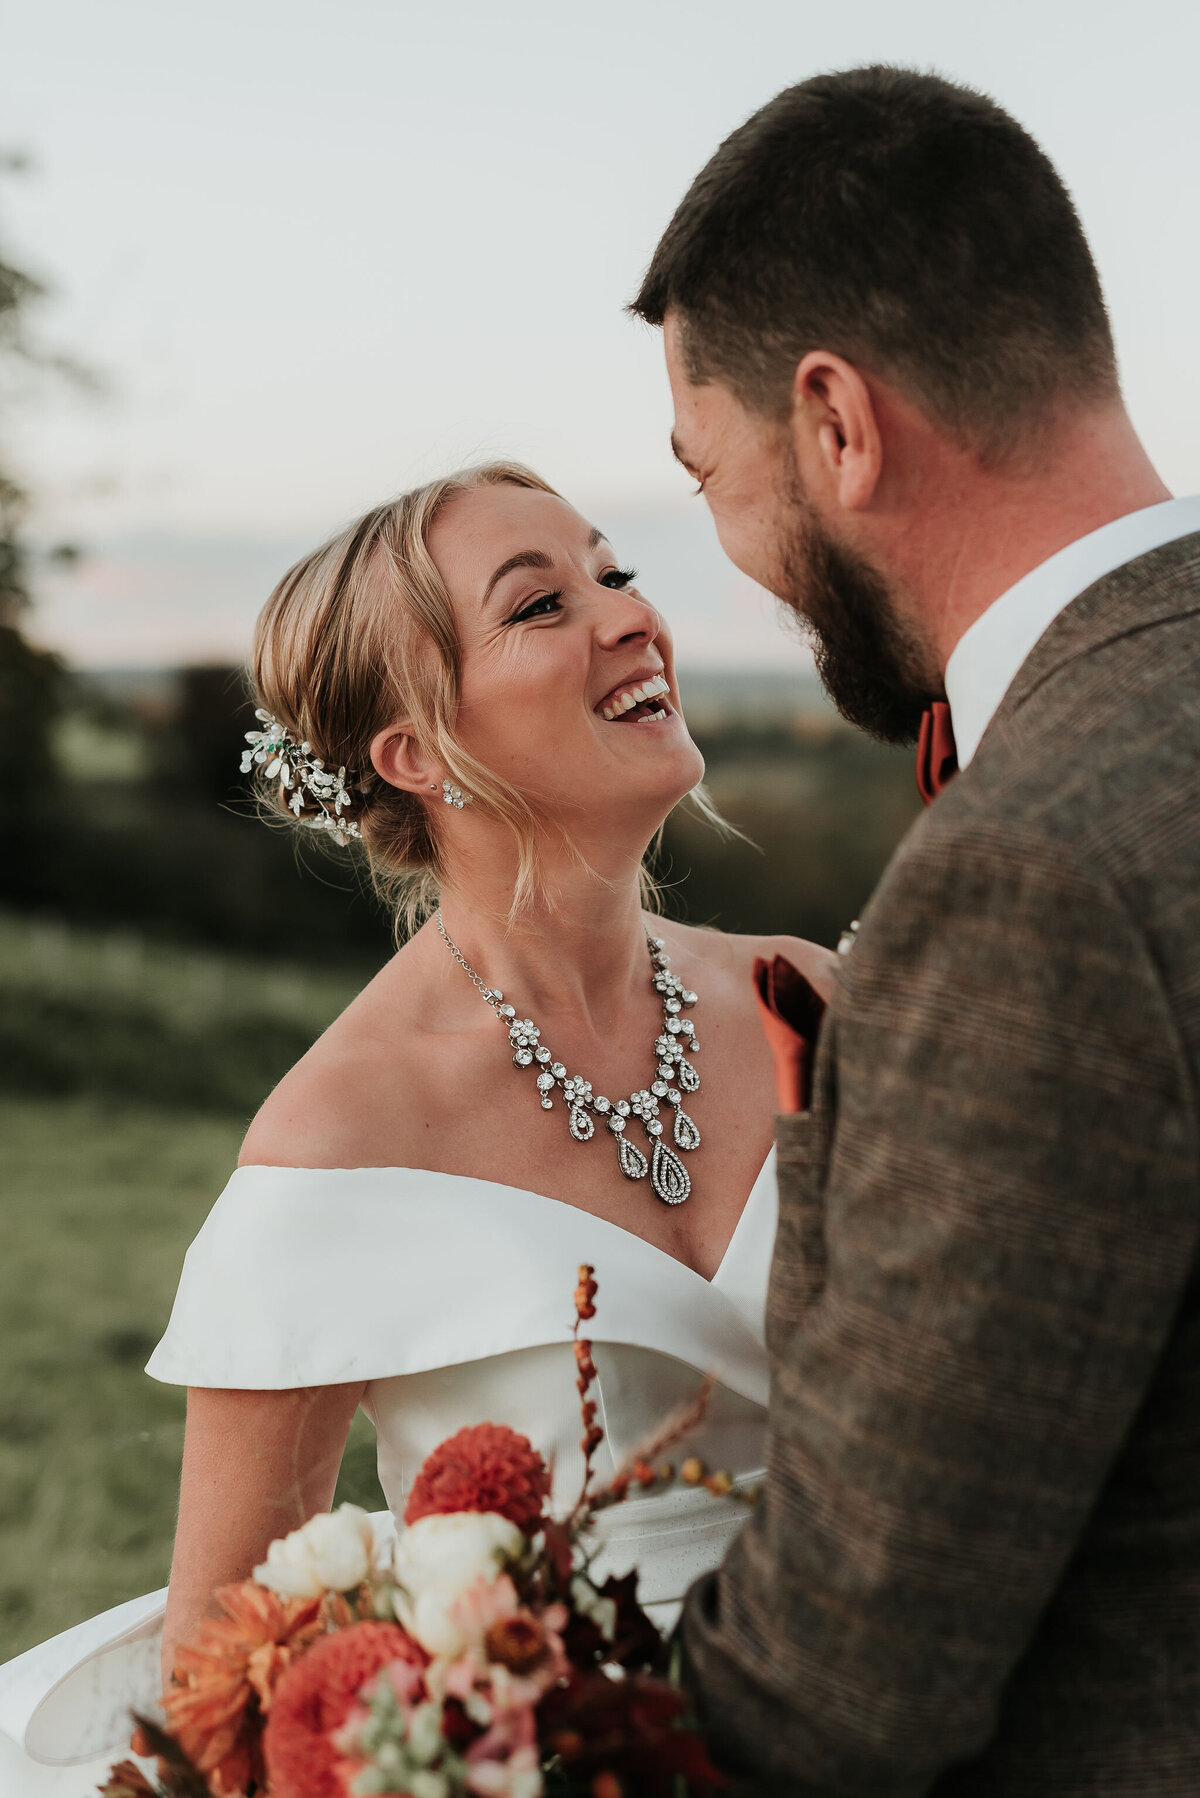 Bride smiling gently at her husband wearing stunning jewelled necklace at their Autumn wedding at Montague Farm, Sussex